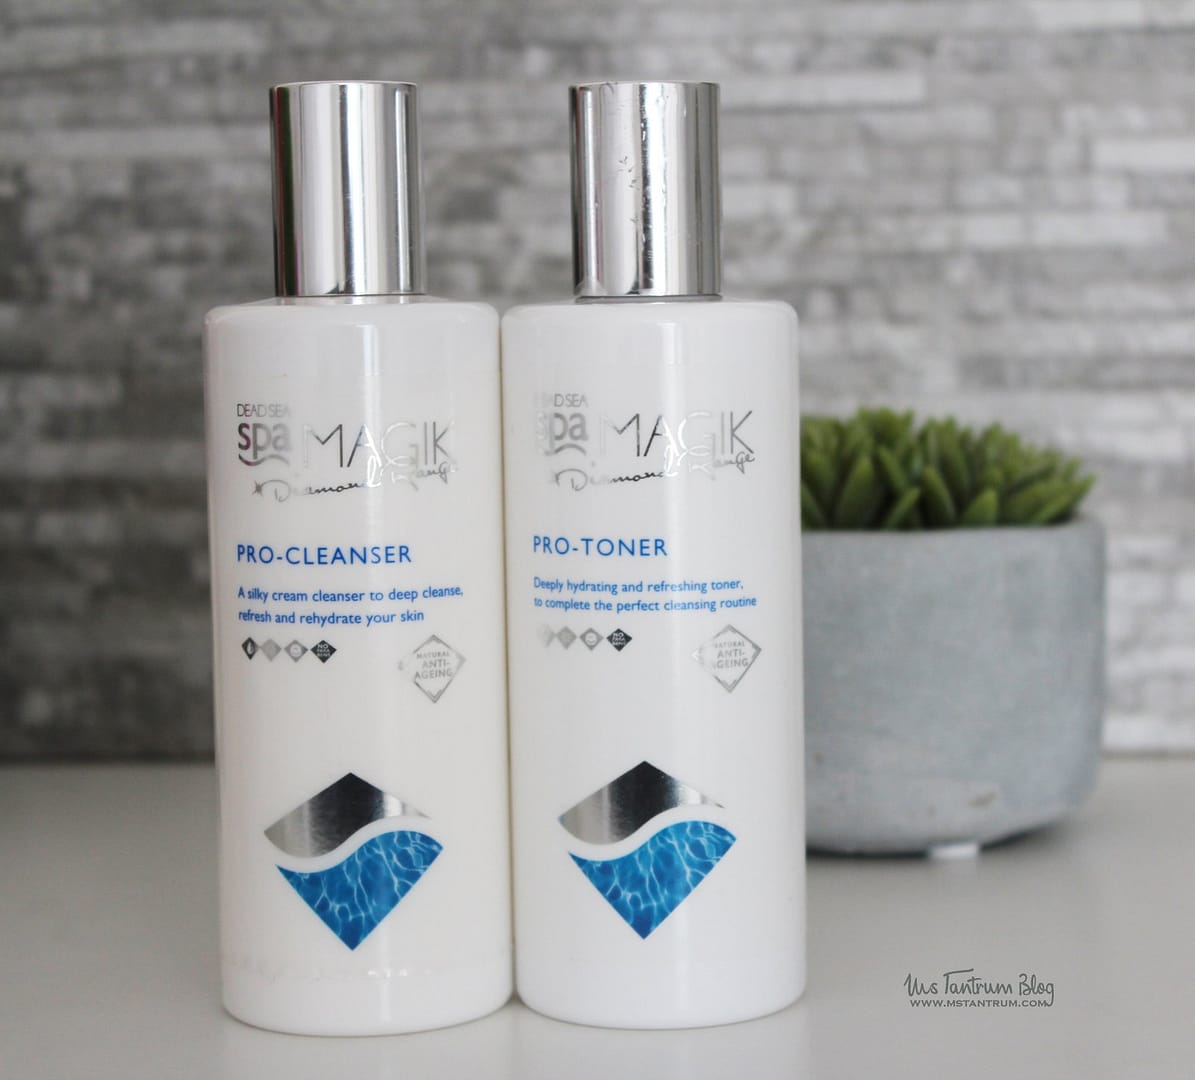 Dead Sea Spa Magik Cleanser and toner duo from Beauty Expert Natural collection kit + Discount code